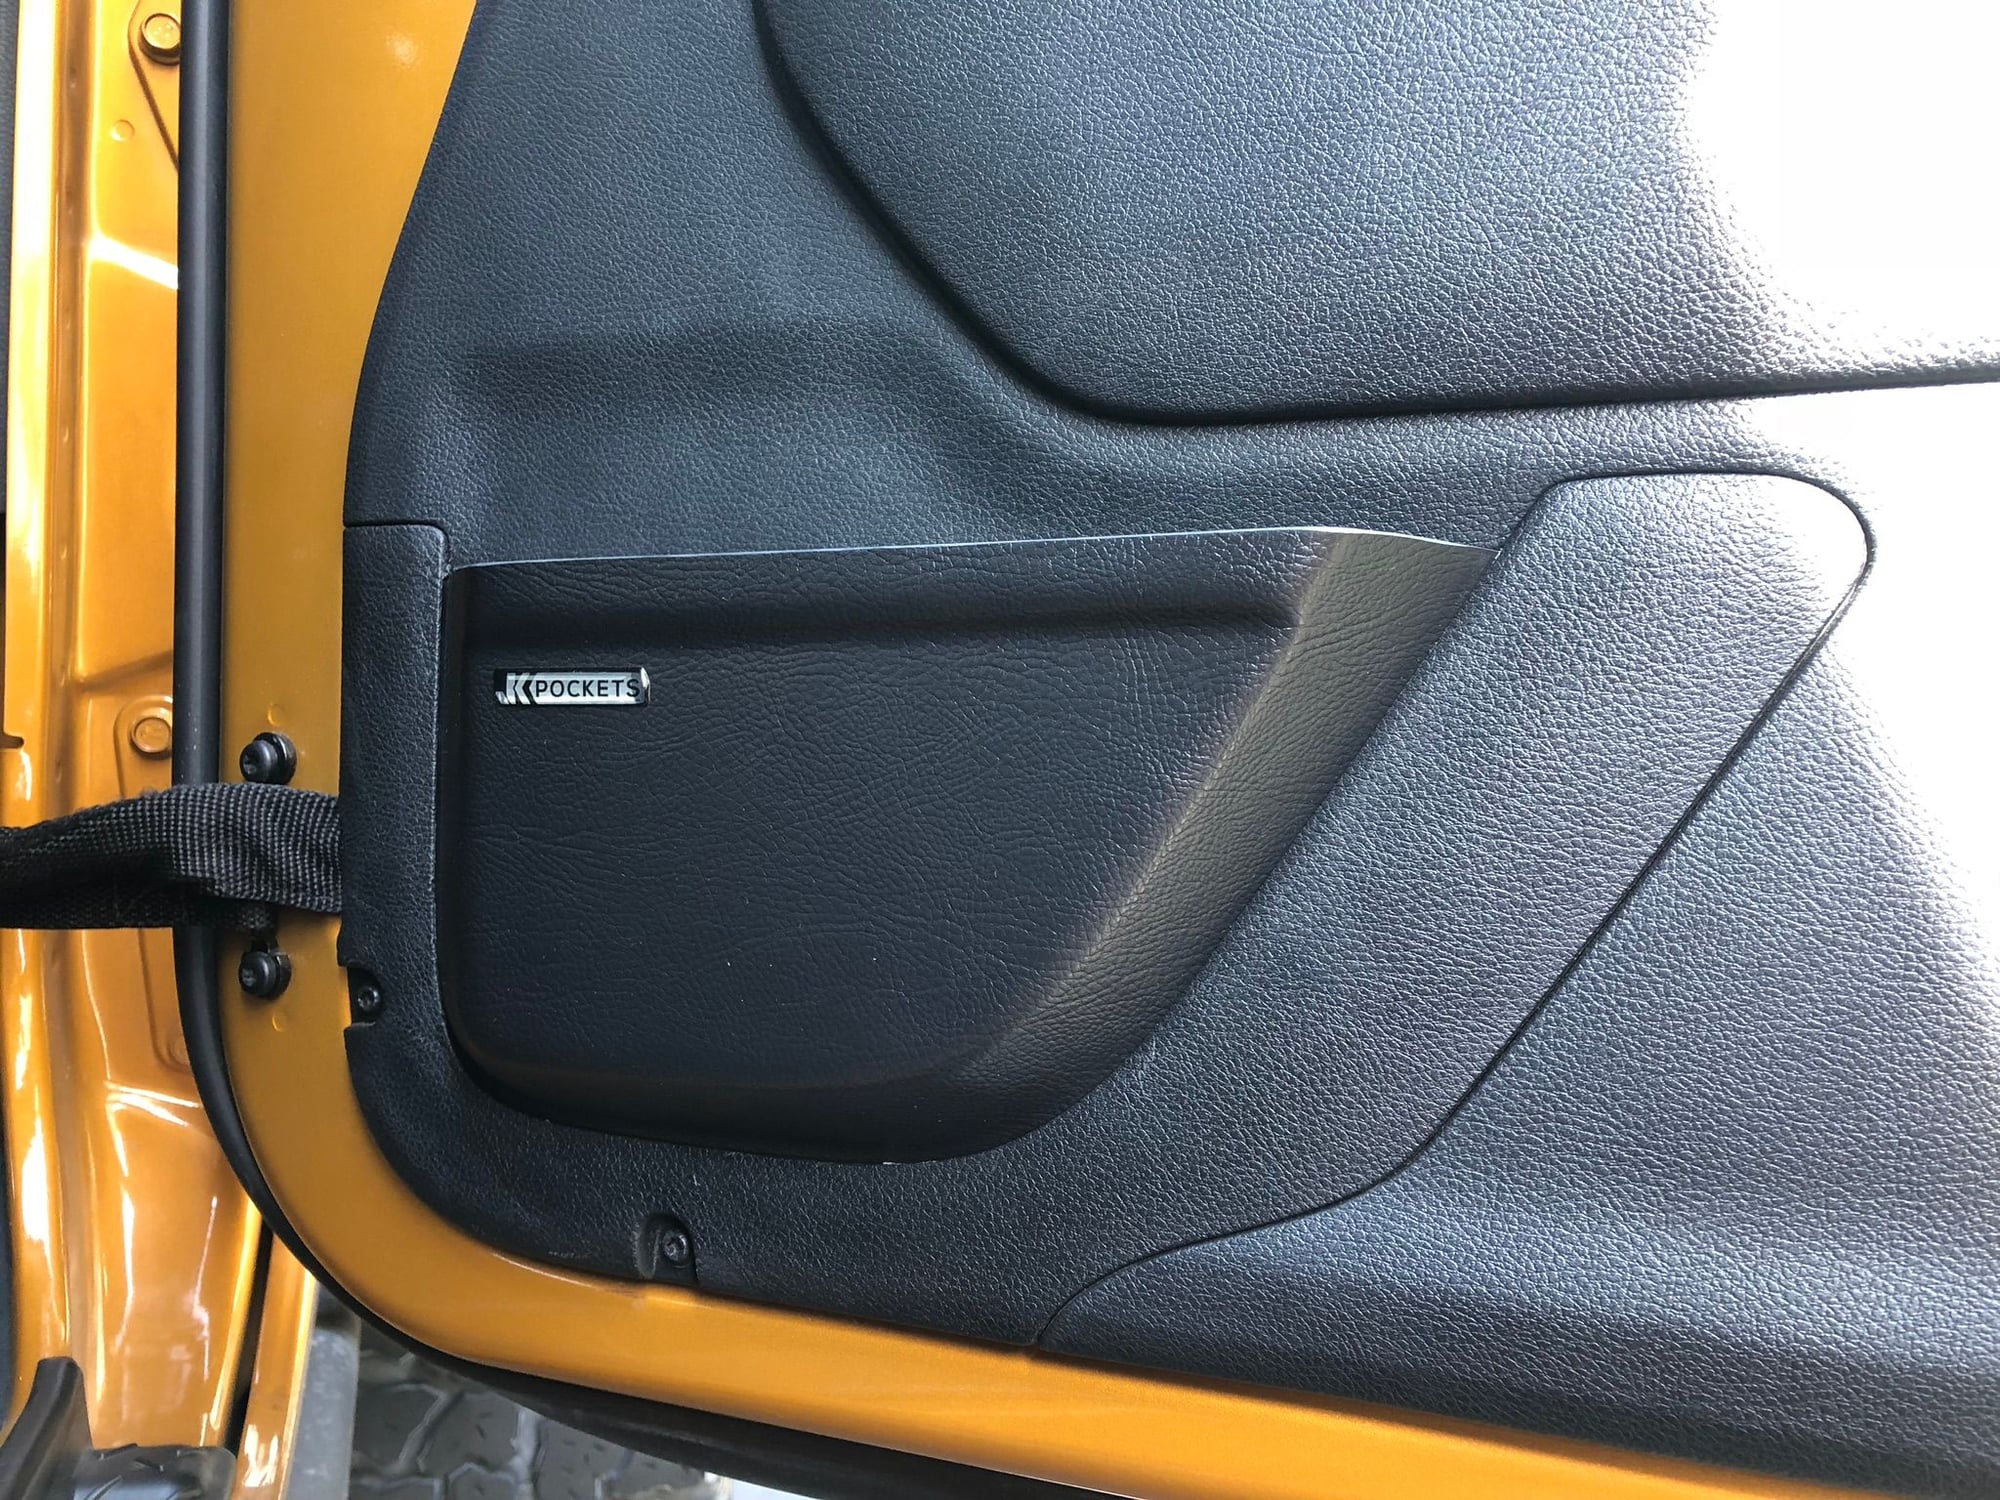 Interior/Upholstery - Fix your JK's stretched out door nets - New - 2011 to 2018 Jeep Wrangler - Redondo Beach, CA 90278, United States